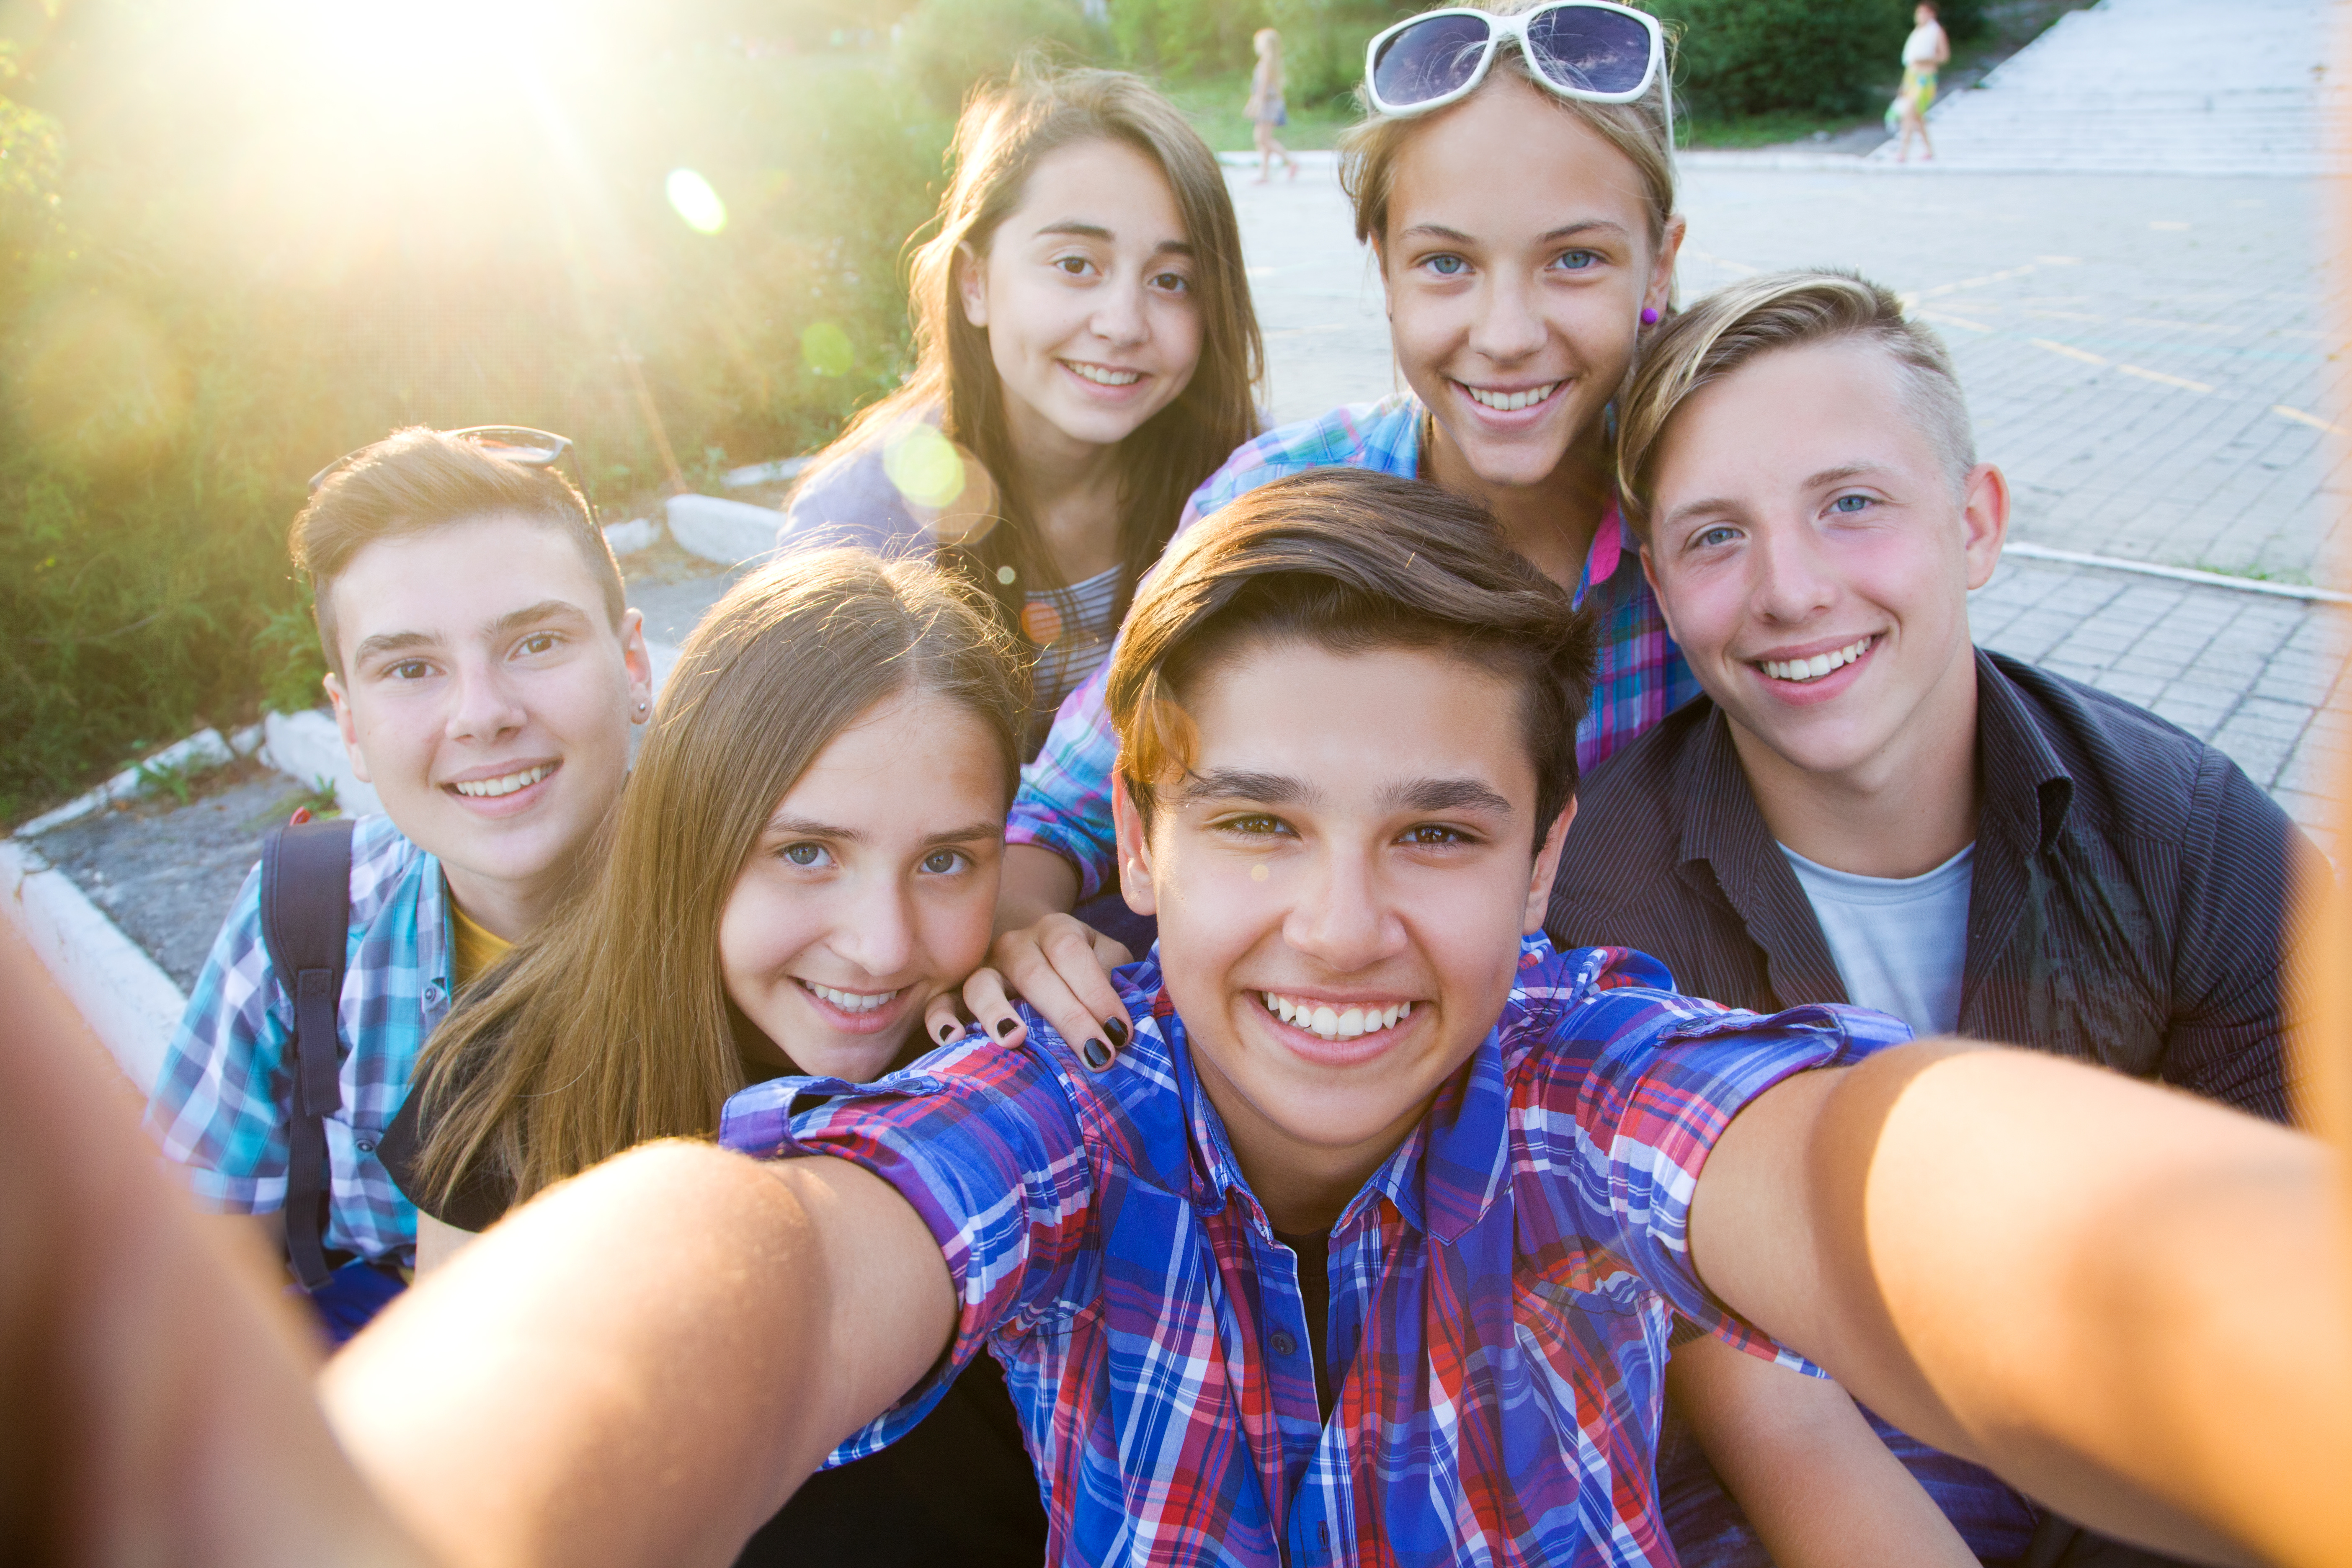 group of teenagers in the park do selfie